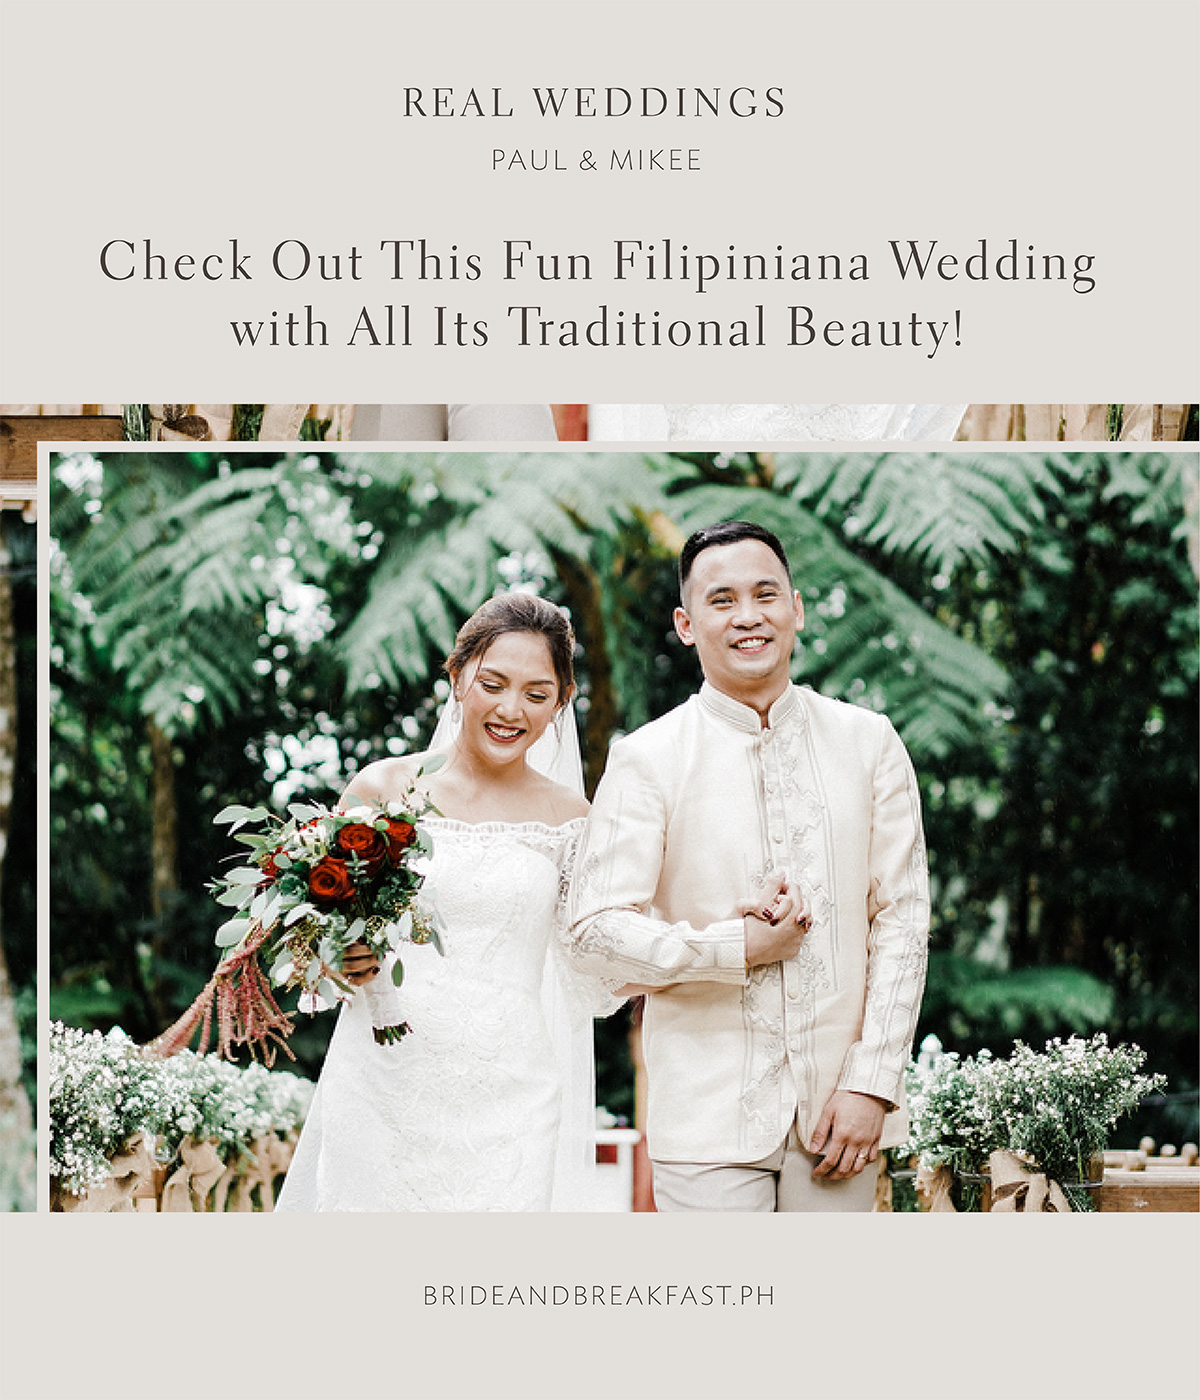 Check Out This Fun Filipiniana Wedding with All Its Traditional Beauty!